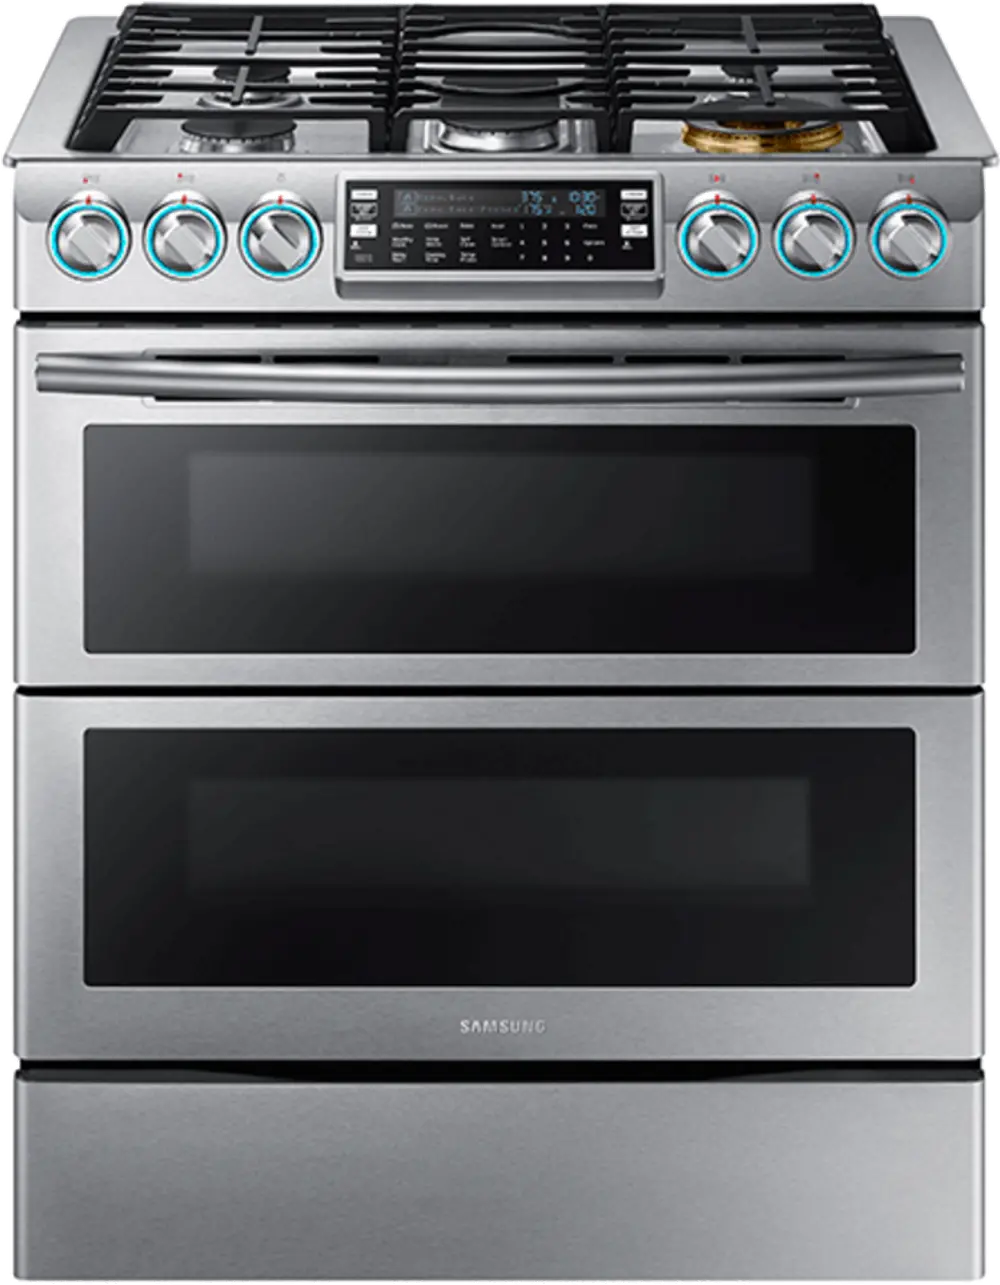 NX58K9850SS Samsung Double Oven Gas Range with Blue LED Illuminated Knobs - 5.8 cu. ft. Stainless Steel-1